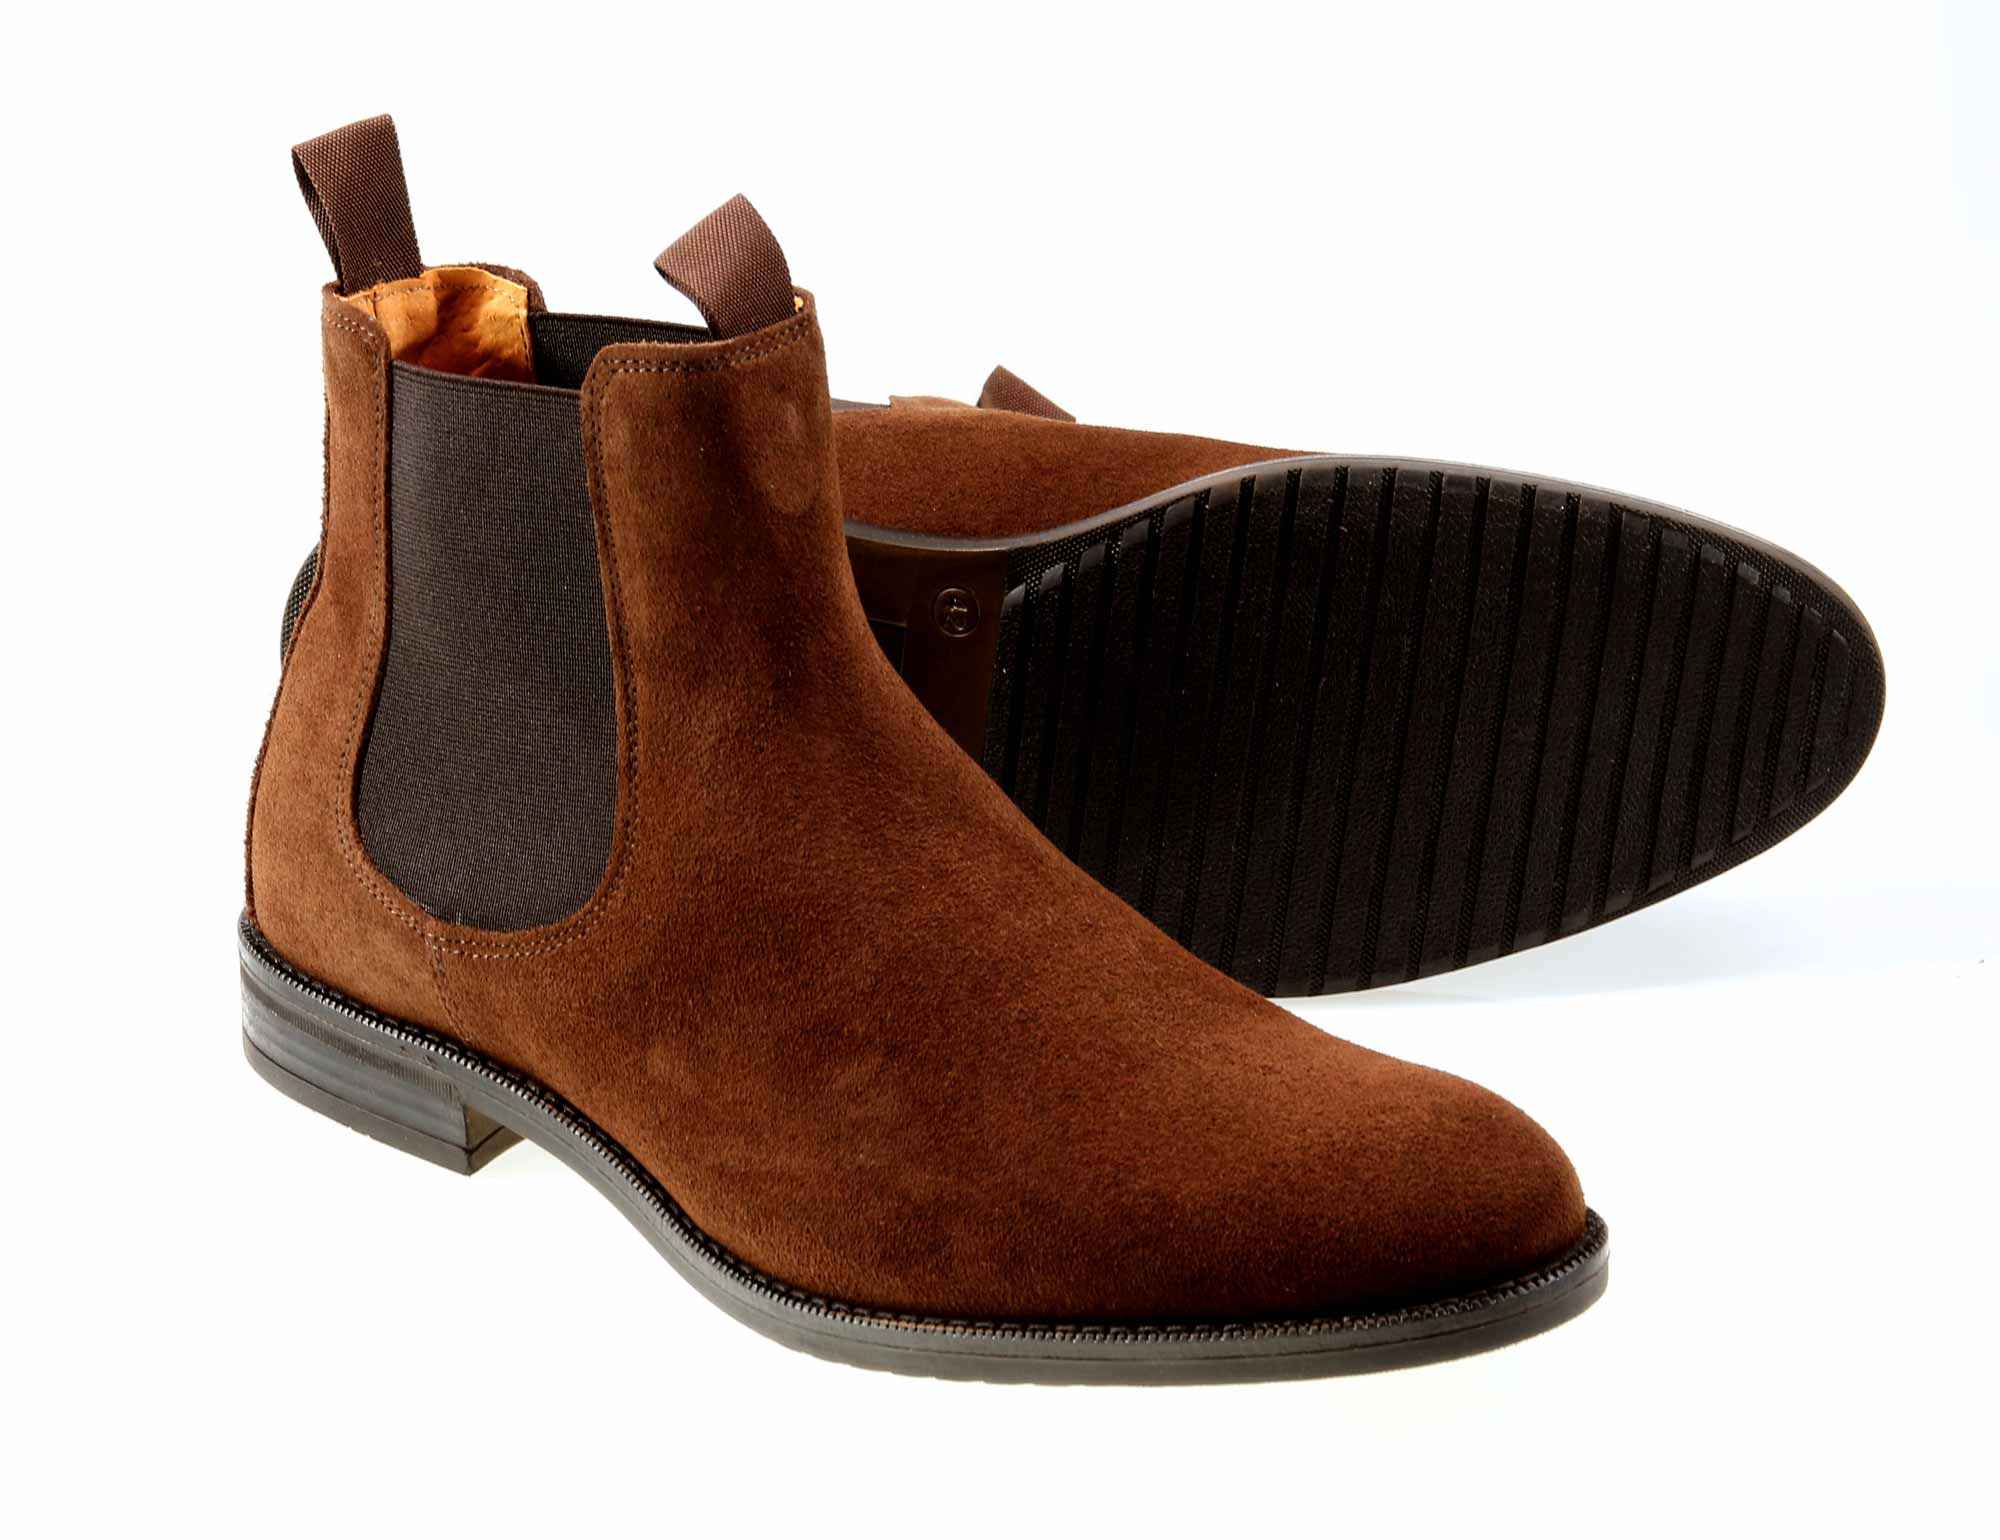 in style with TWICKENHAM Mens Chocolate Suede Boot - a must-have!